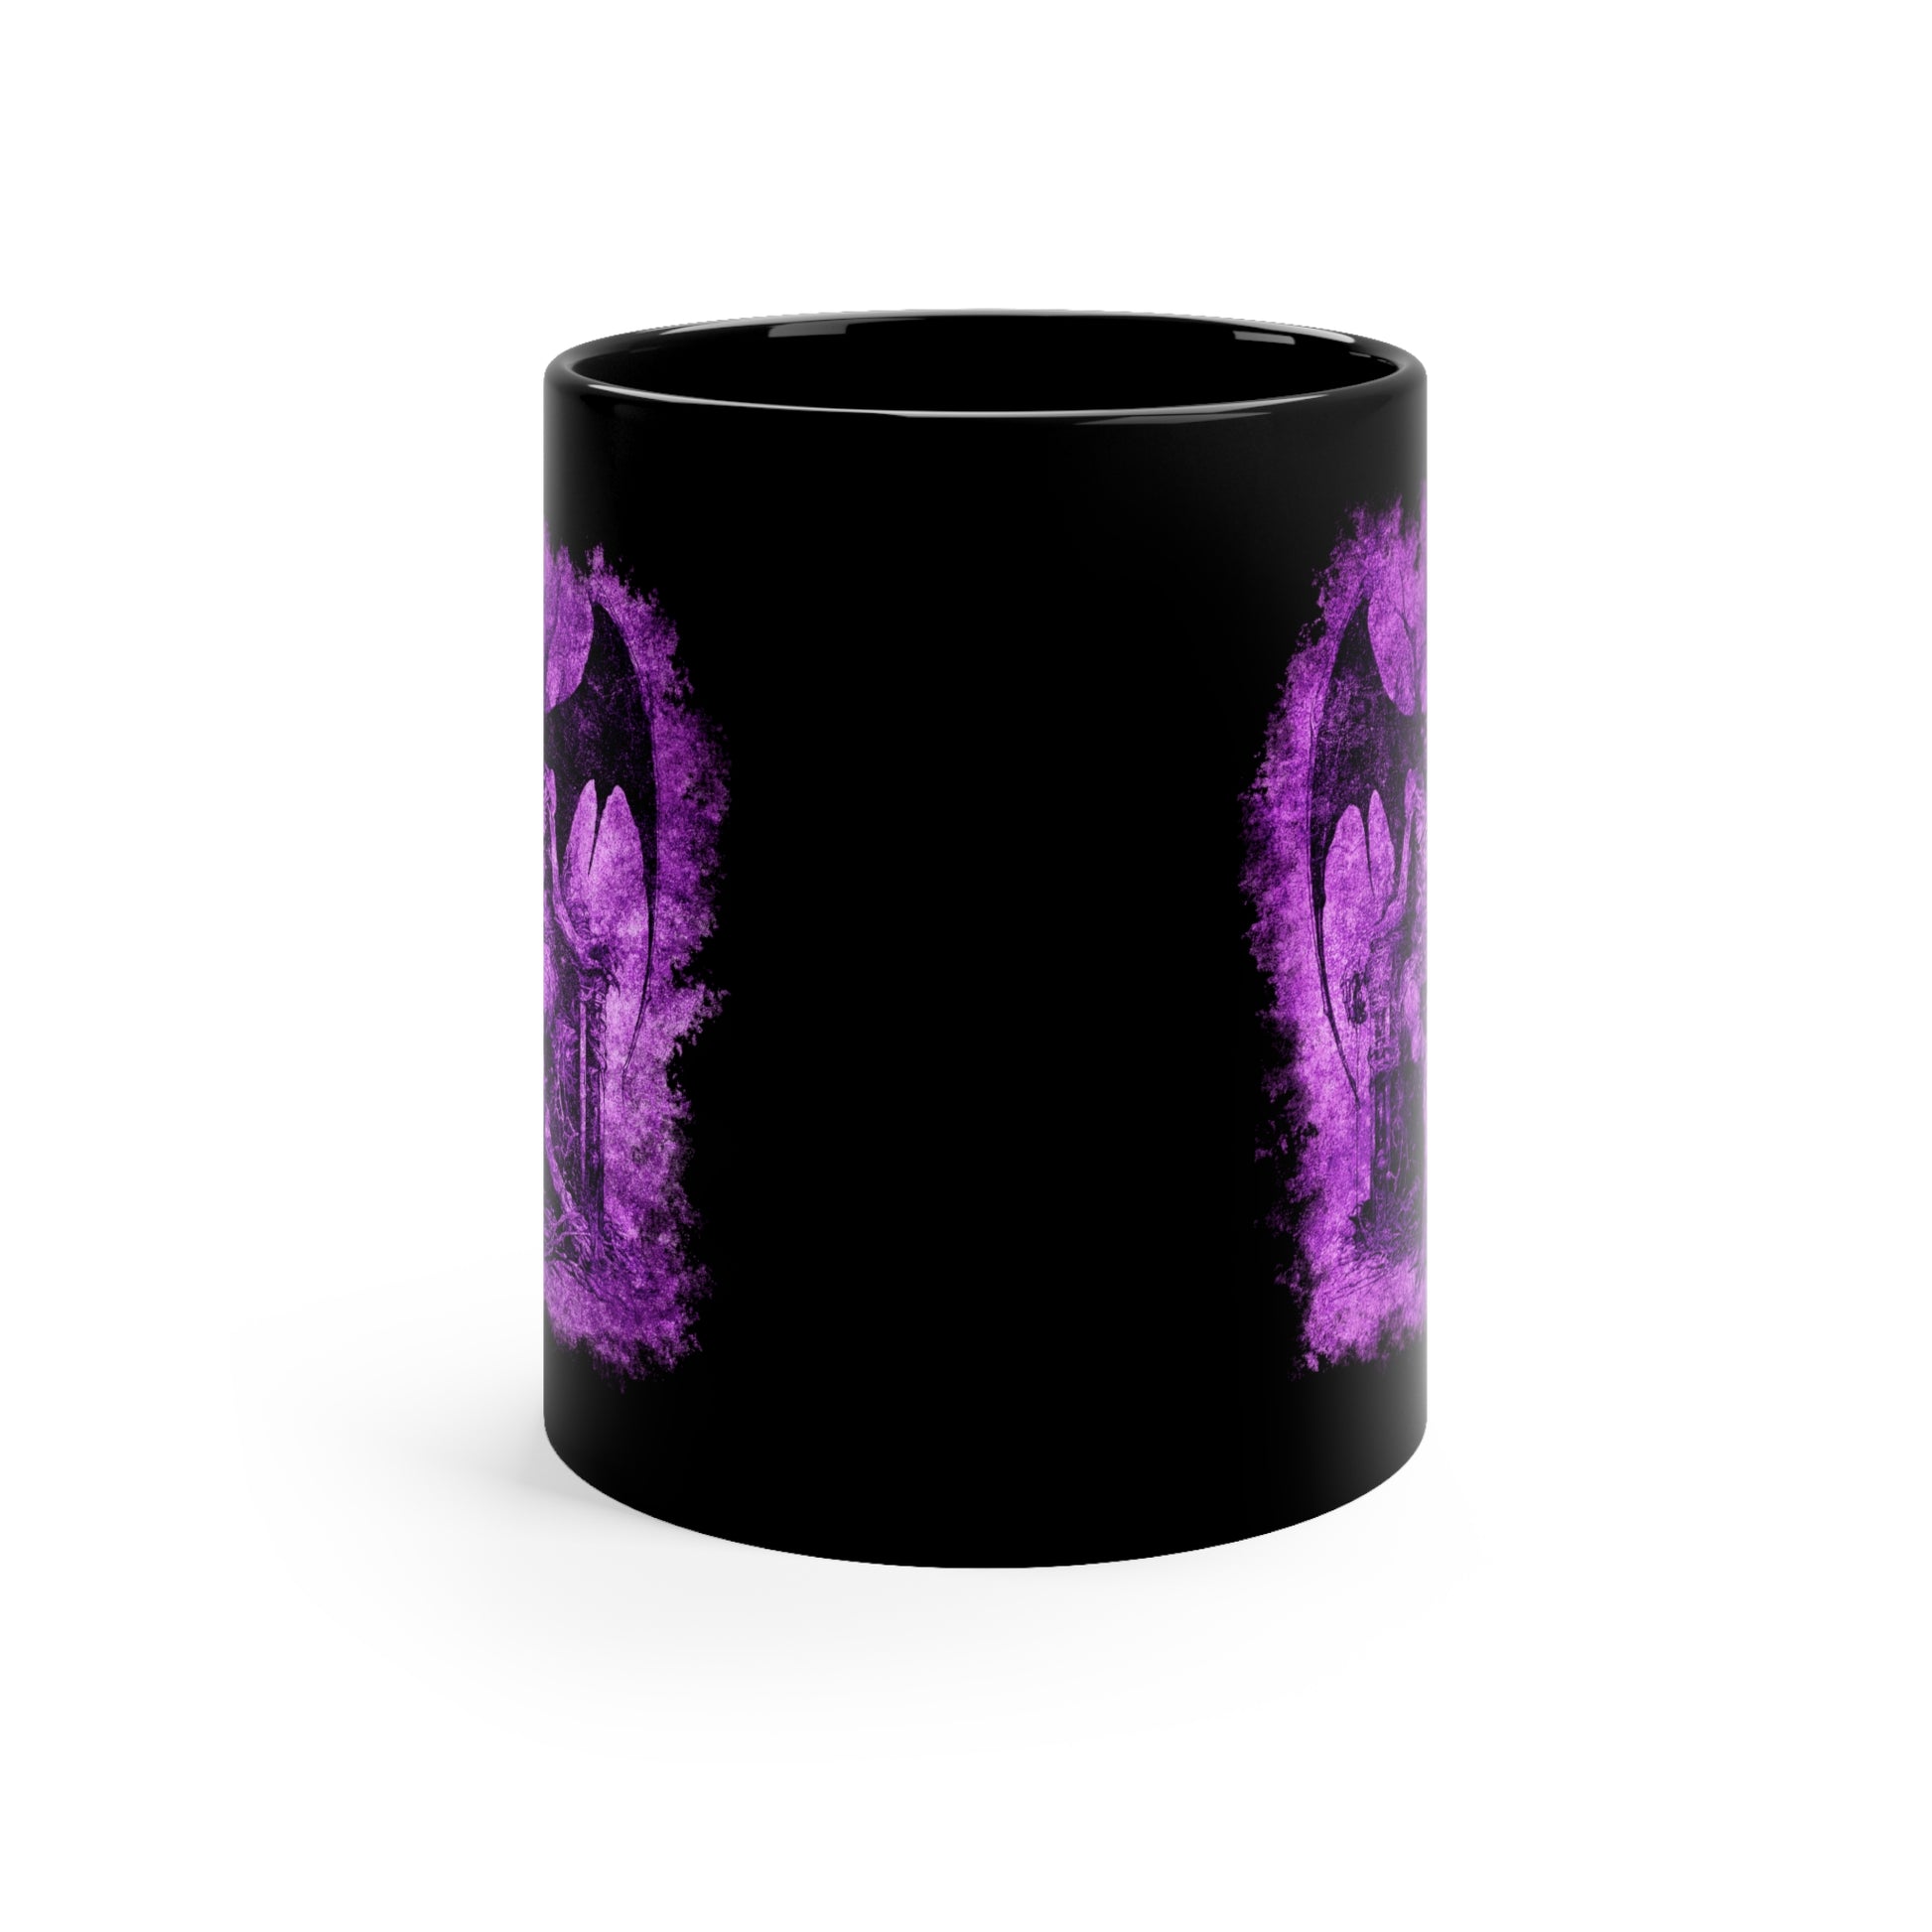 Mug Devil on his Throne in Hell in Purple - Frogos Design